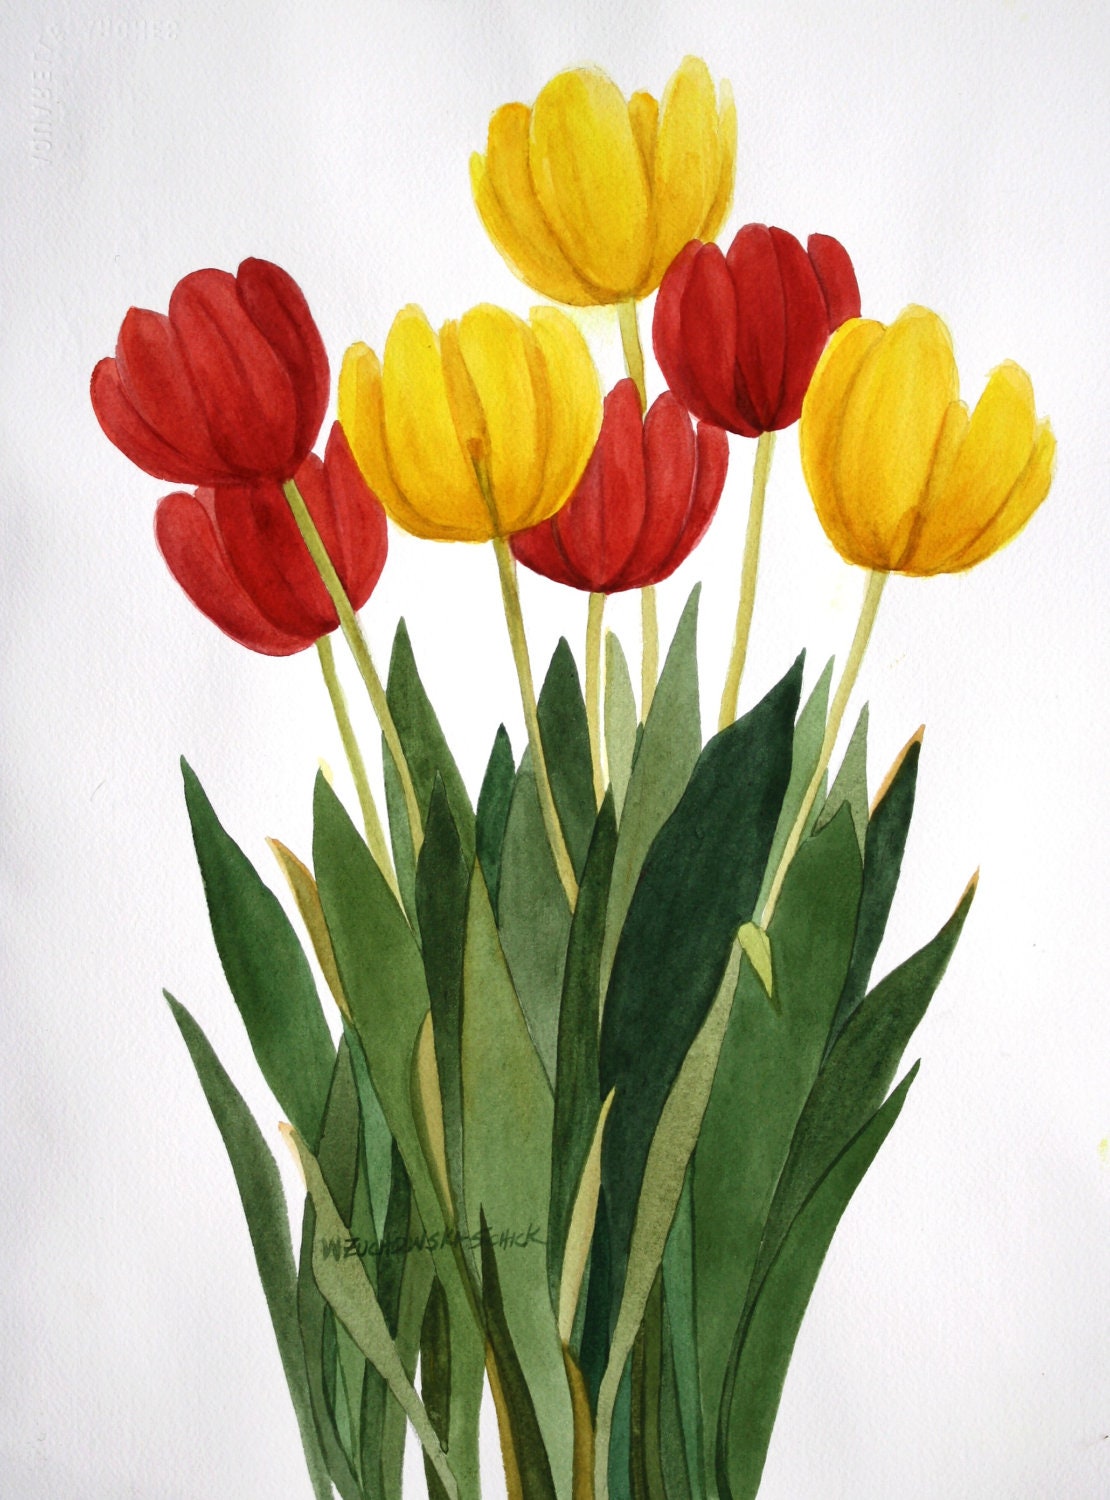 Red and Yellow Tulip Bunch Watercolor Original by Wandas | Etsy